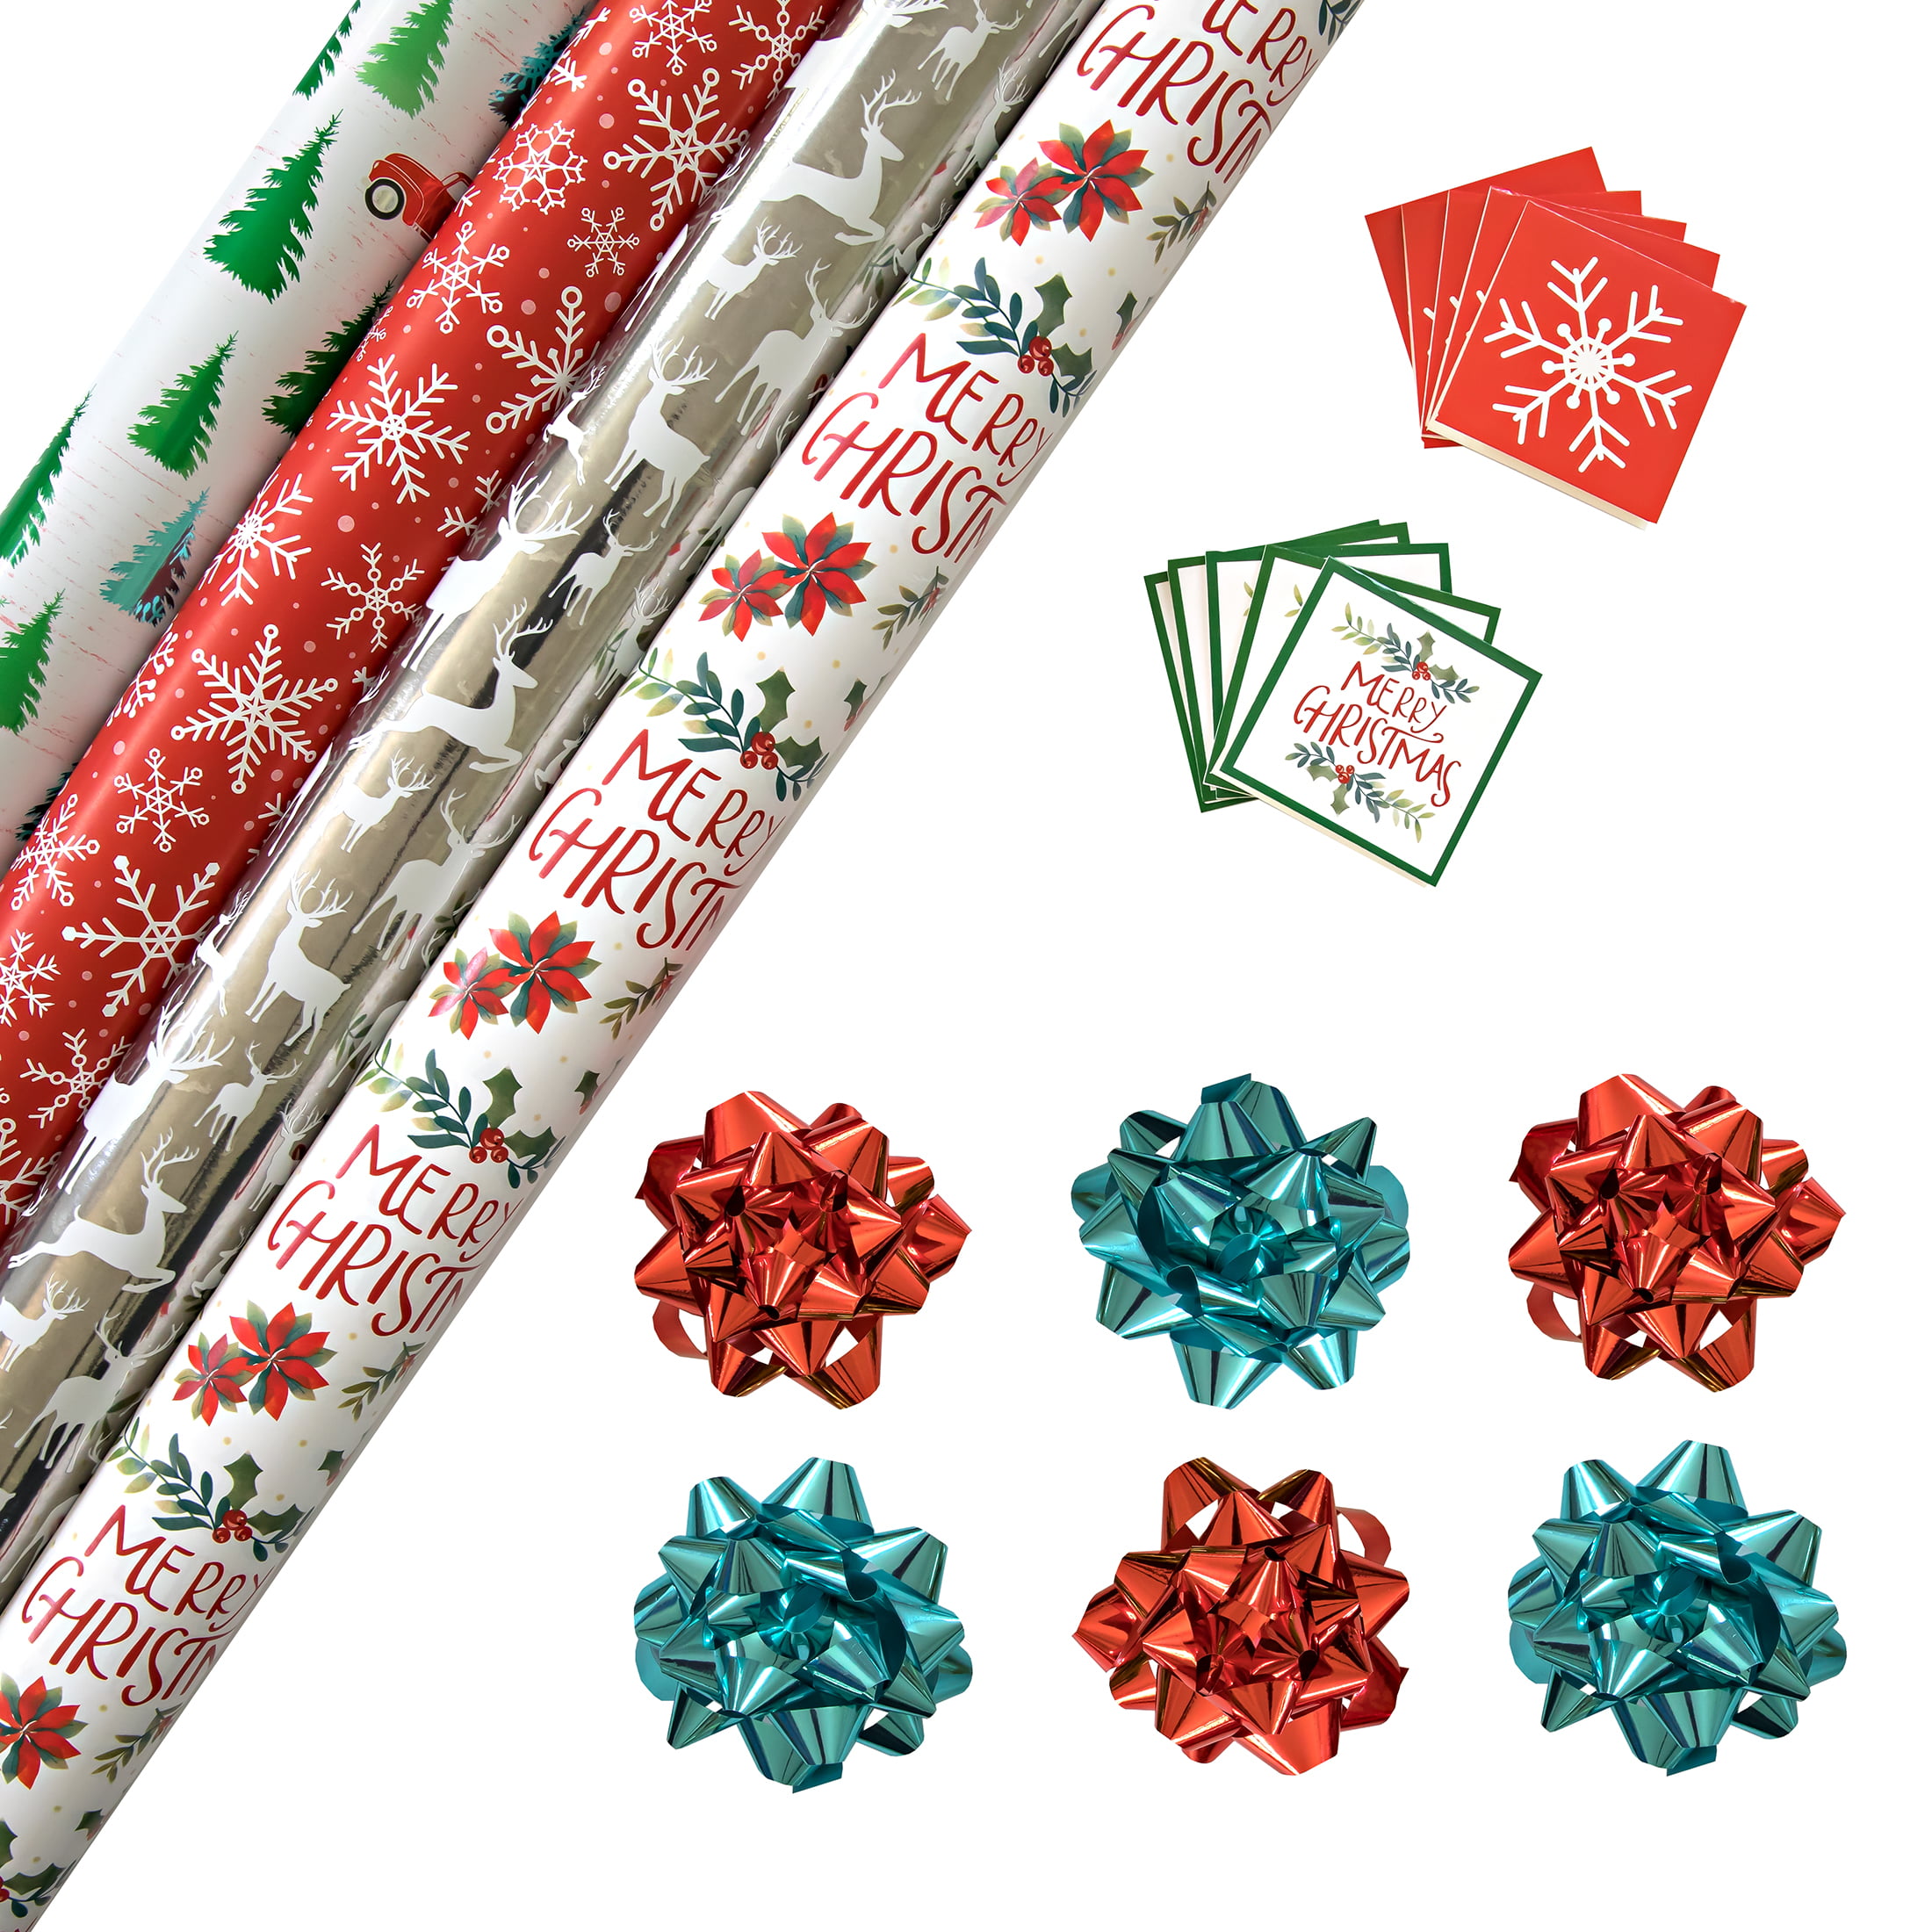 Ryan's World Gift Wrap Set - (4) Wrapping Paper Rolls, (10) Gift Tags, (6)  Bows, Ryan's World Theme 